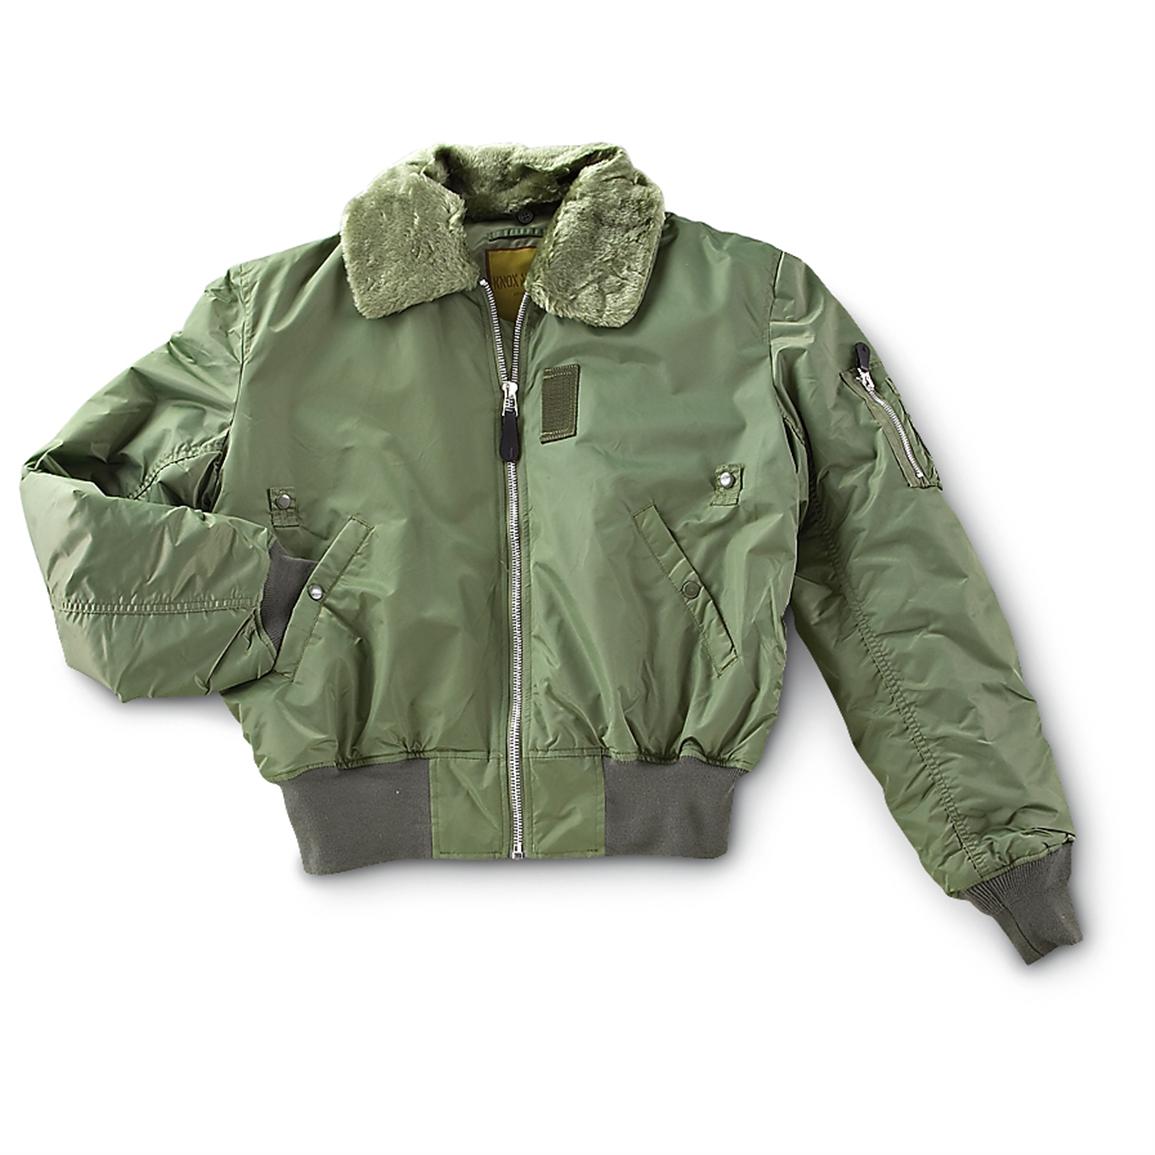 Military-spec B15 Bomber Jacket - 190936, Tactical Clothing at